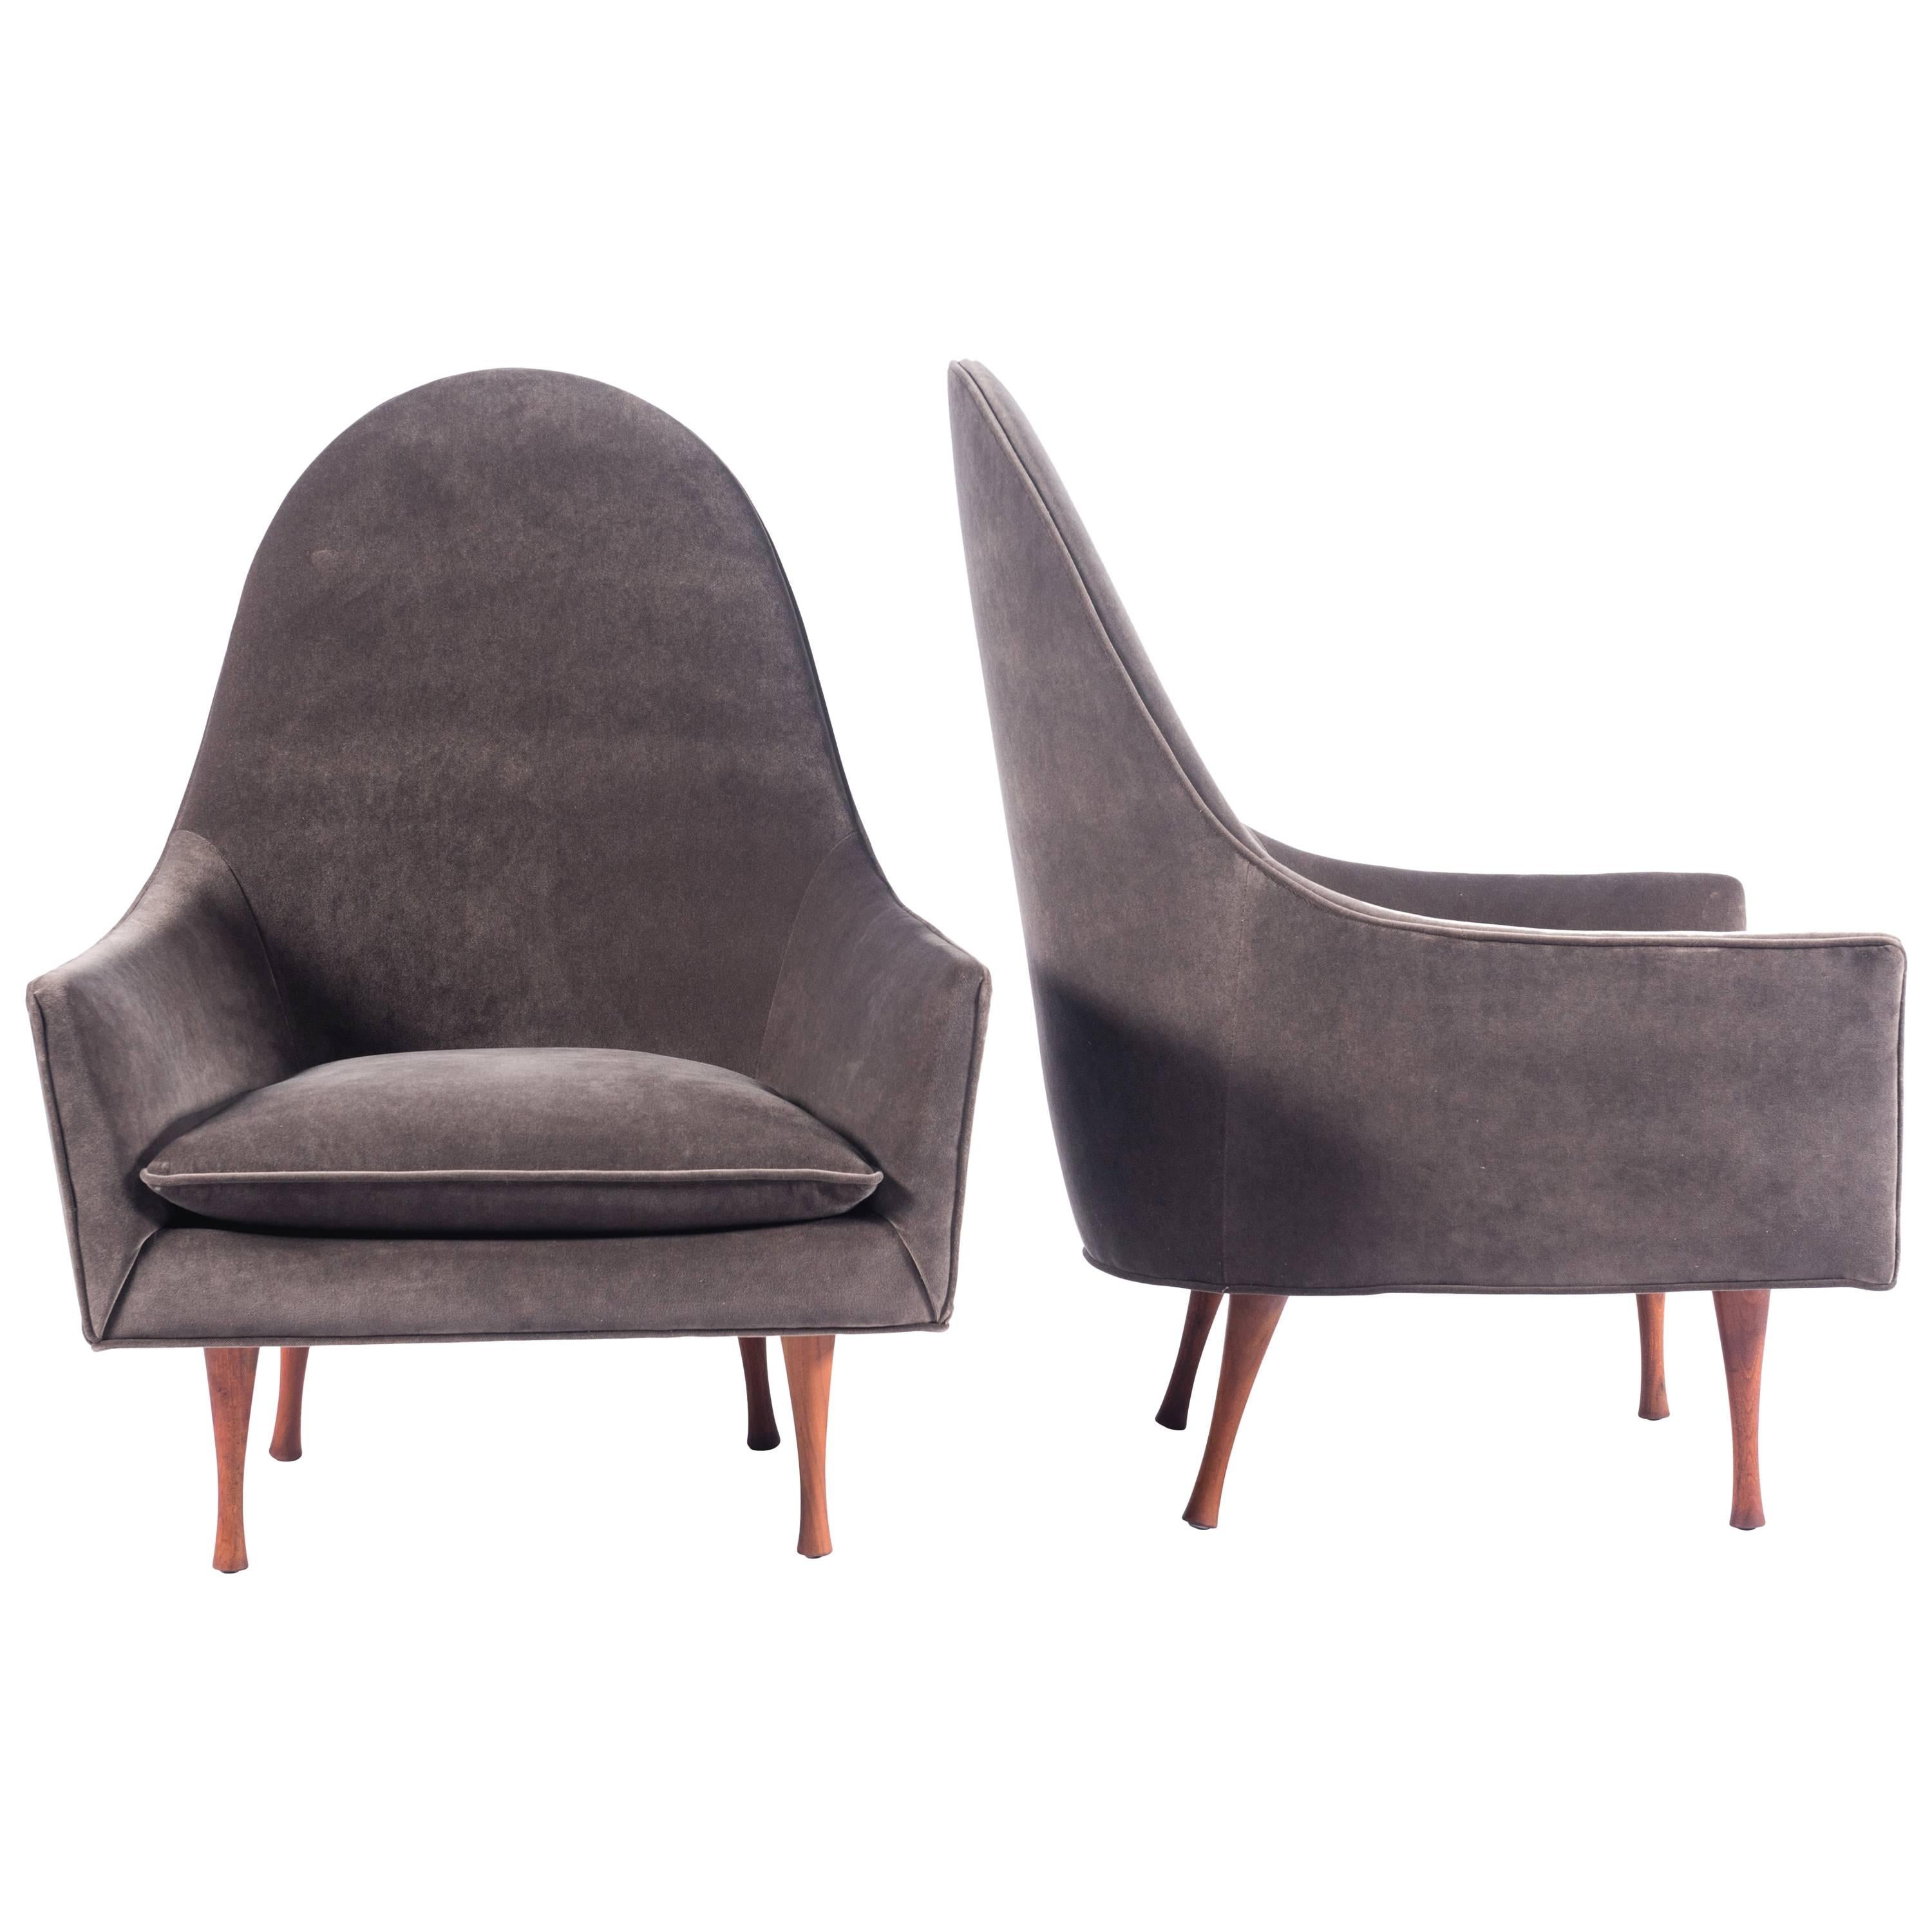 Pair of Lounge Chairs by Paul McCobb for Widdicomb